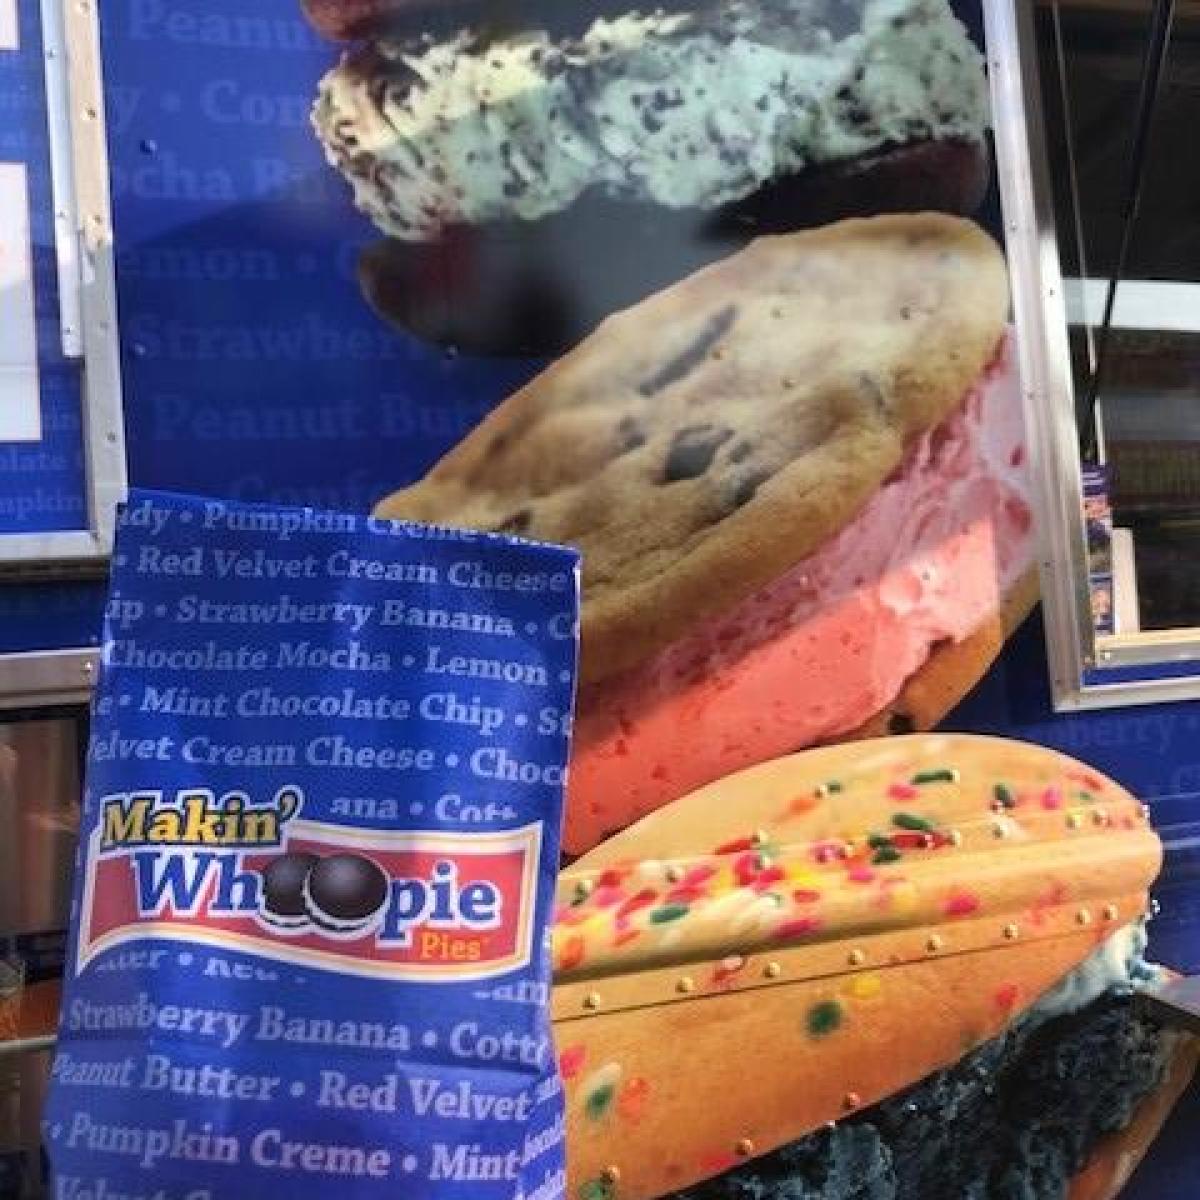 Whoopie Pies Food Truck at the Lebanon Area Fair | Visit Lebanon Valley